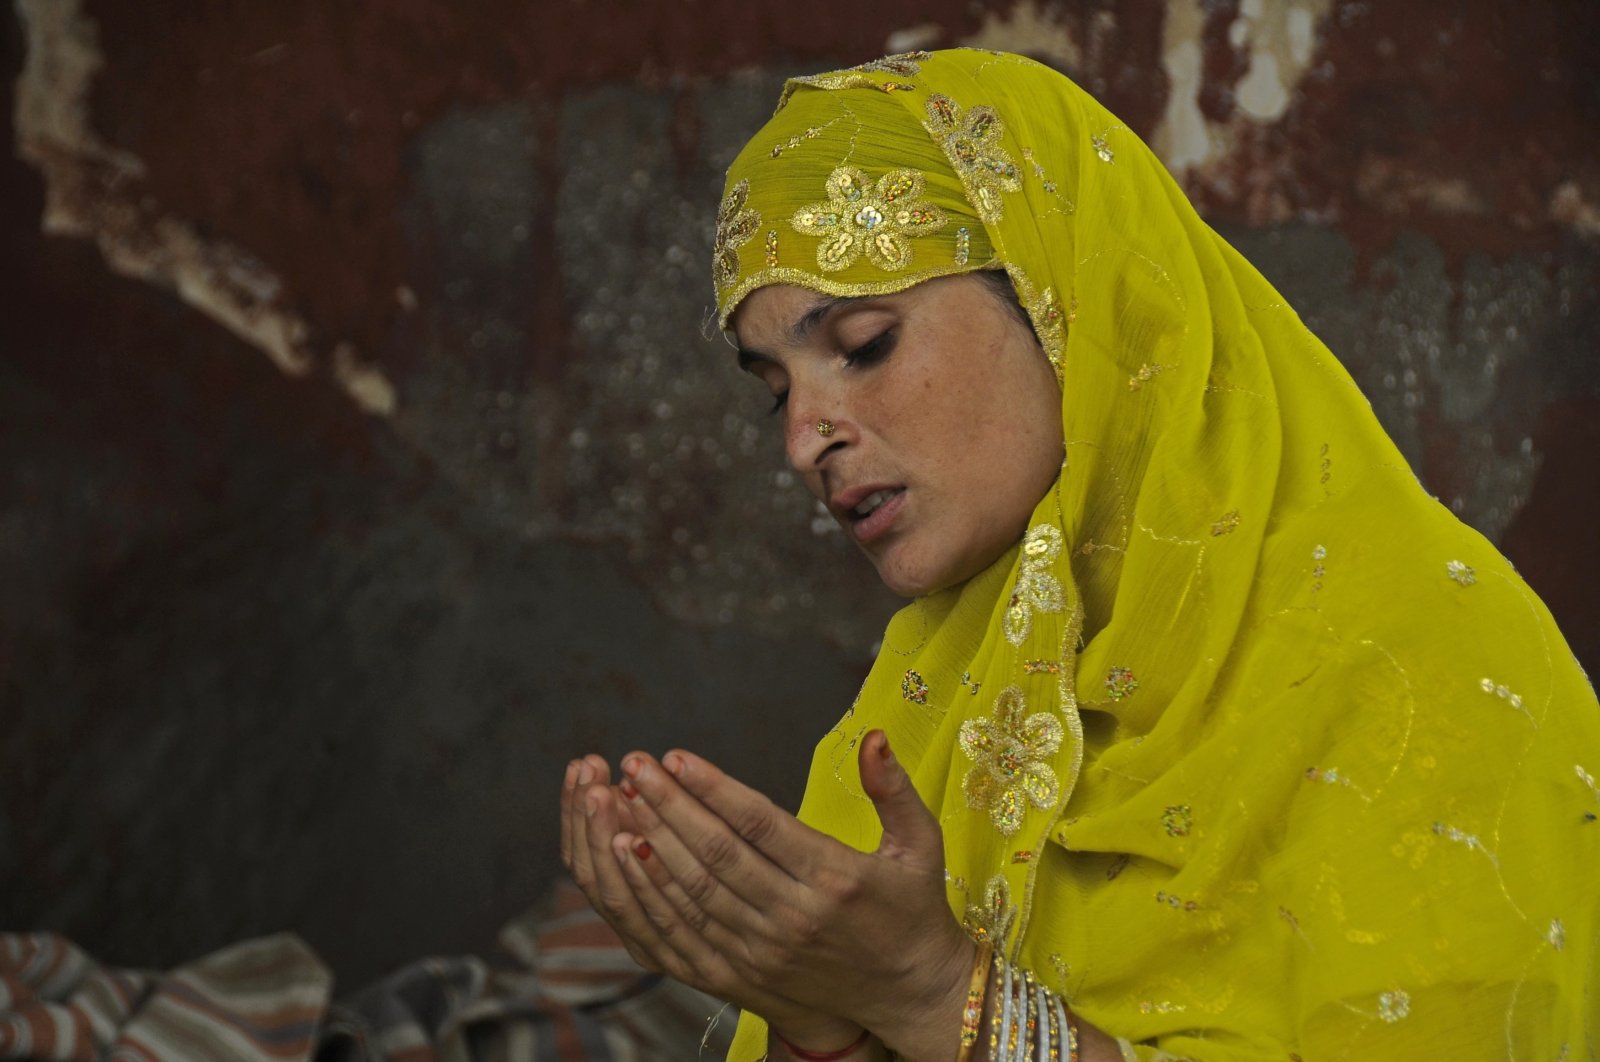 A Muslim woman performs Friday prayers during the holy month of Ramadan at the Jama Masjid (Grand Mosque) in old Delhi, India, Aug. 13, 2010. (Reuters Photo)